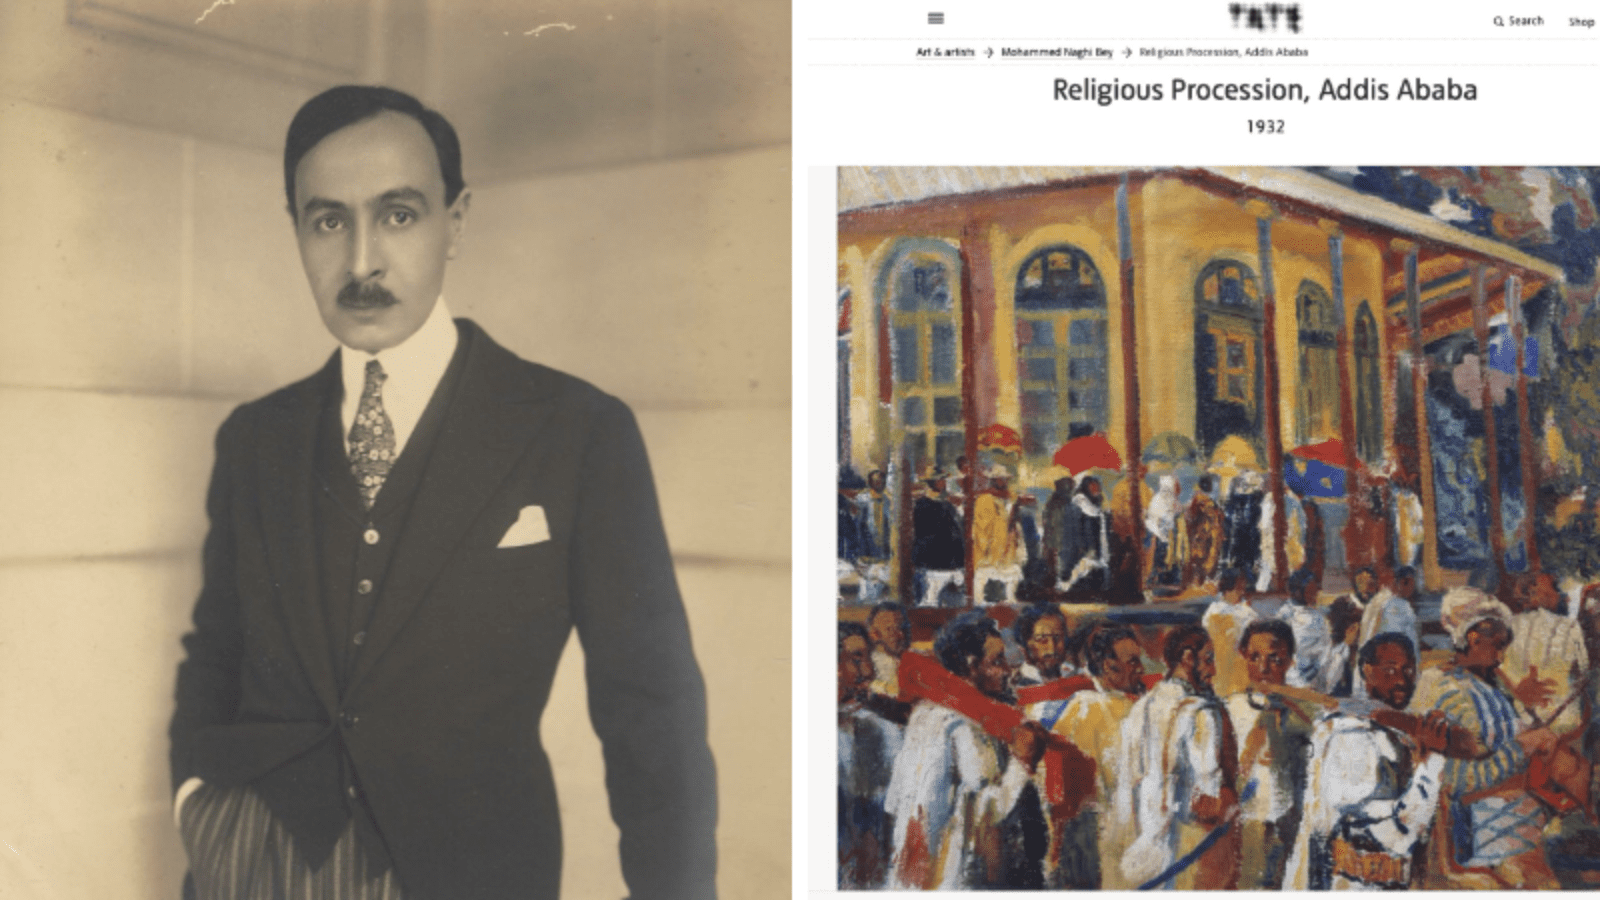 Effat and Mohamed Naghi’s works will be exhibited amongst the French impressionists in Paris